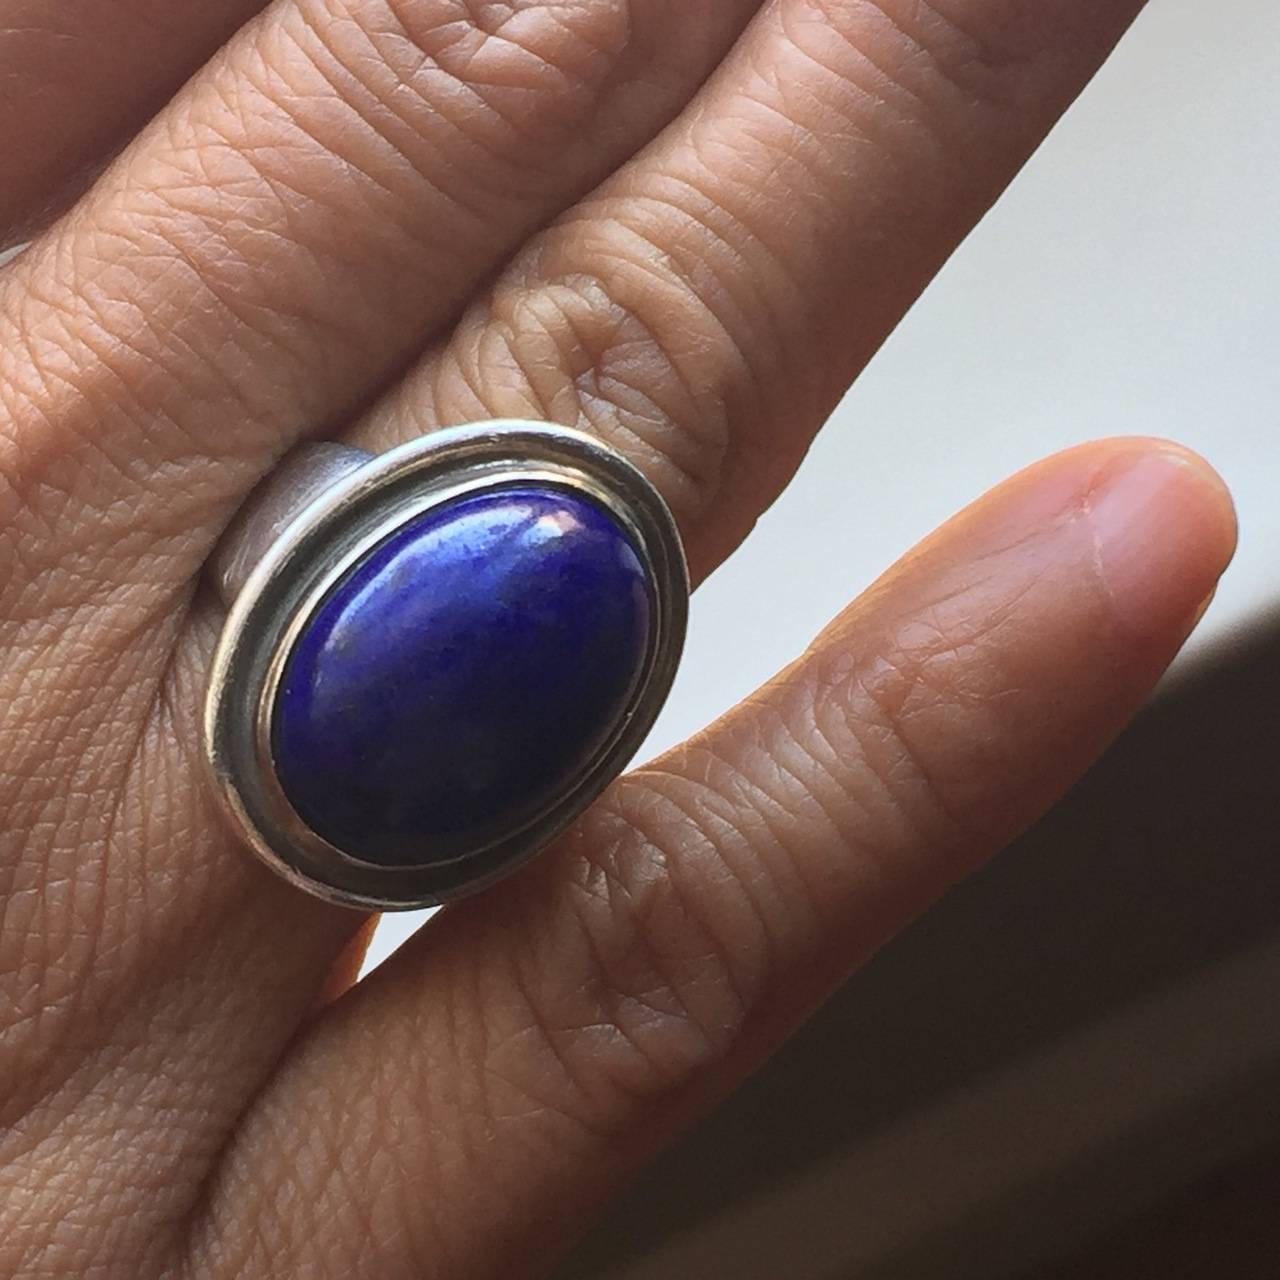 Georg Jensen Ring No. 46A with Lapis Lazuli by Harald Nielsen.

The gemstone has a deep, rich color. Stunning sterling silver ring in excellent condition.   Size 5

Yes, this ring can be re-sized.

Harald Nielsen bio: Harald Nielsen (1892 -